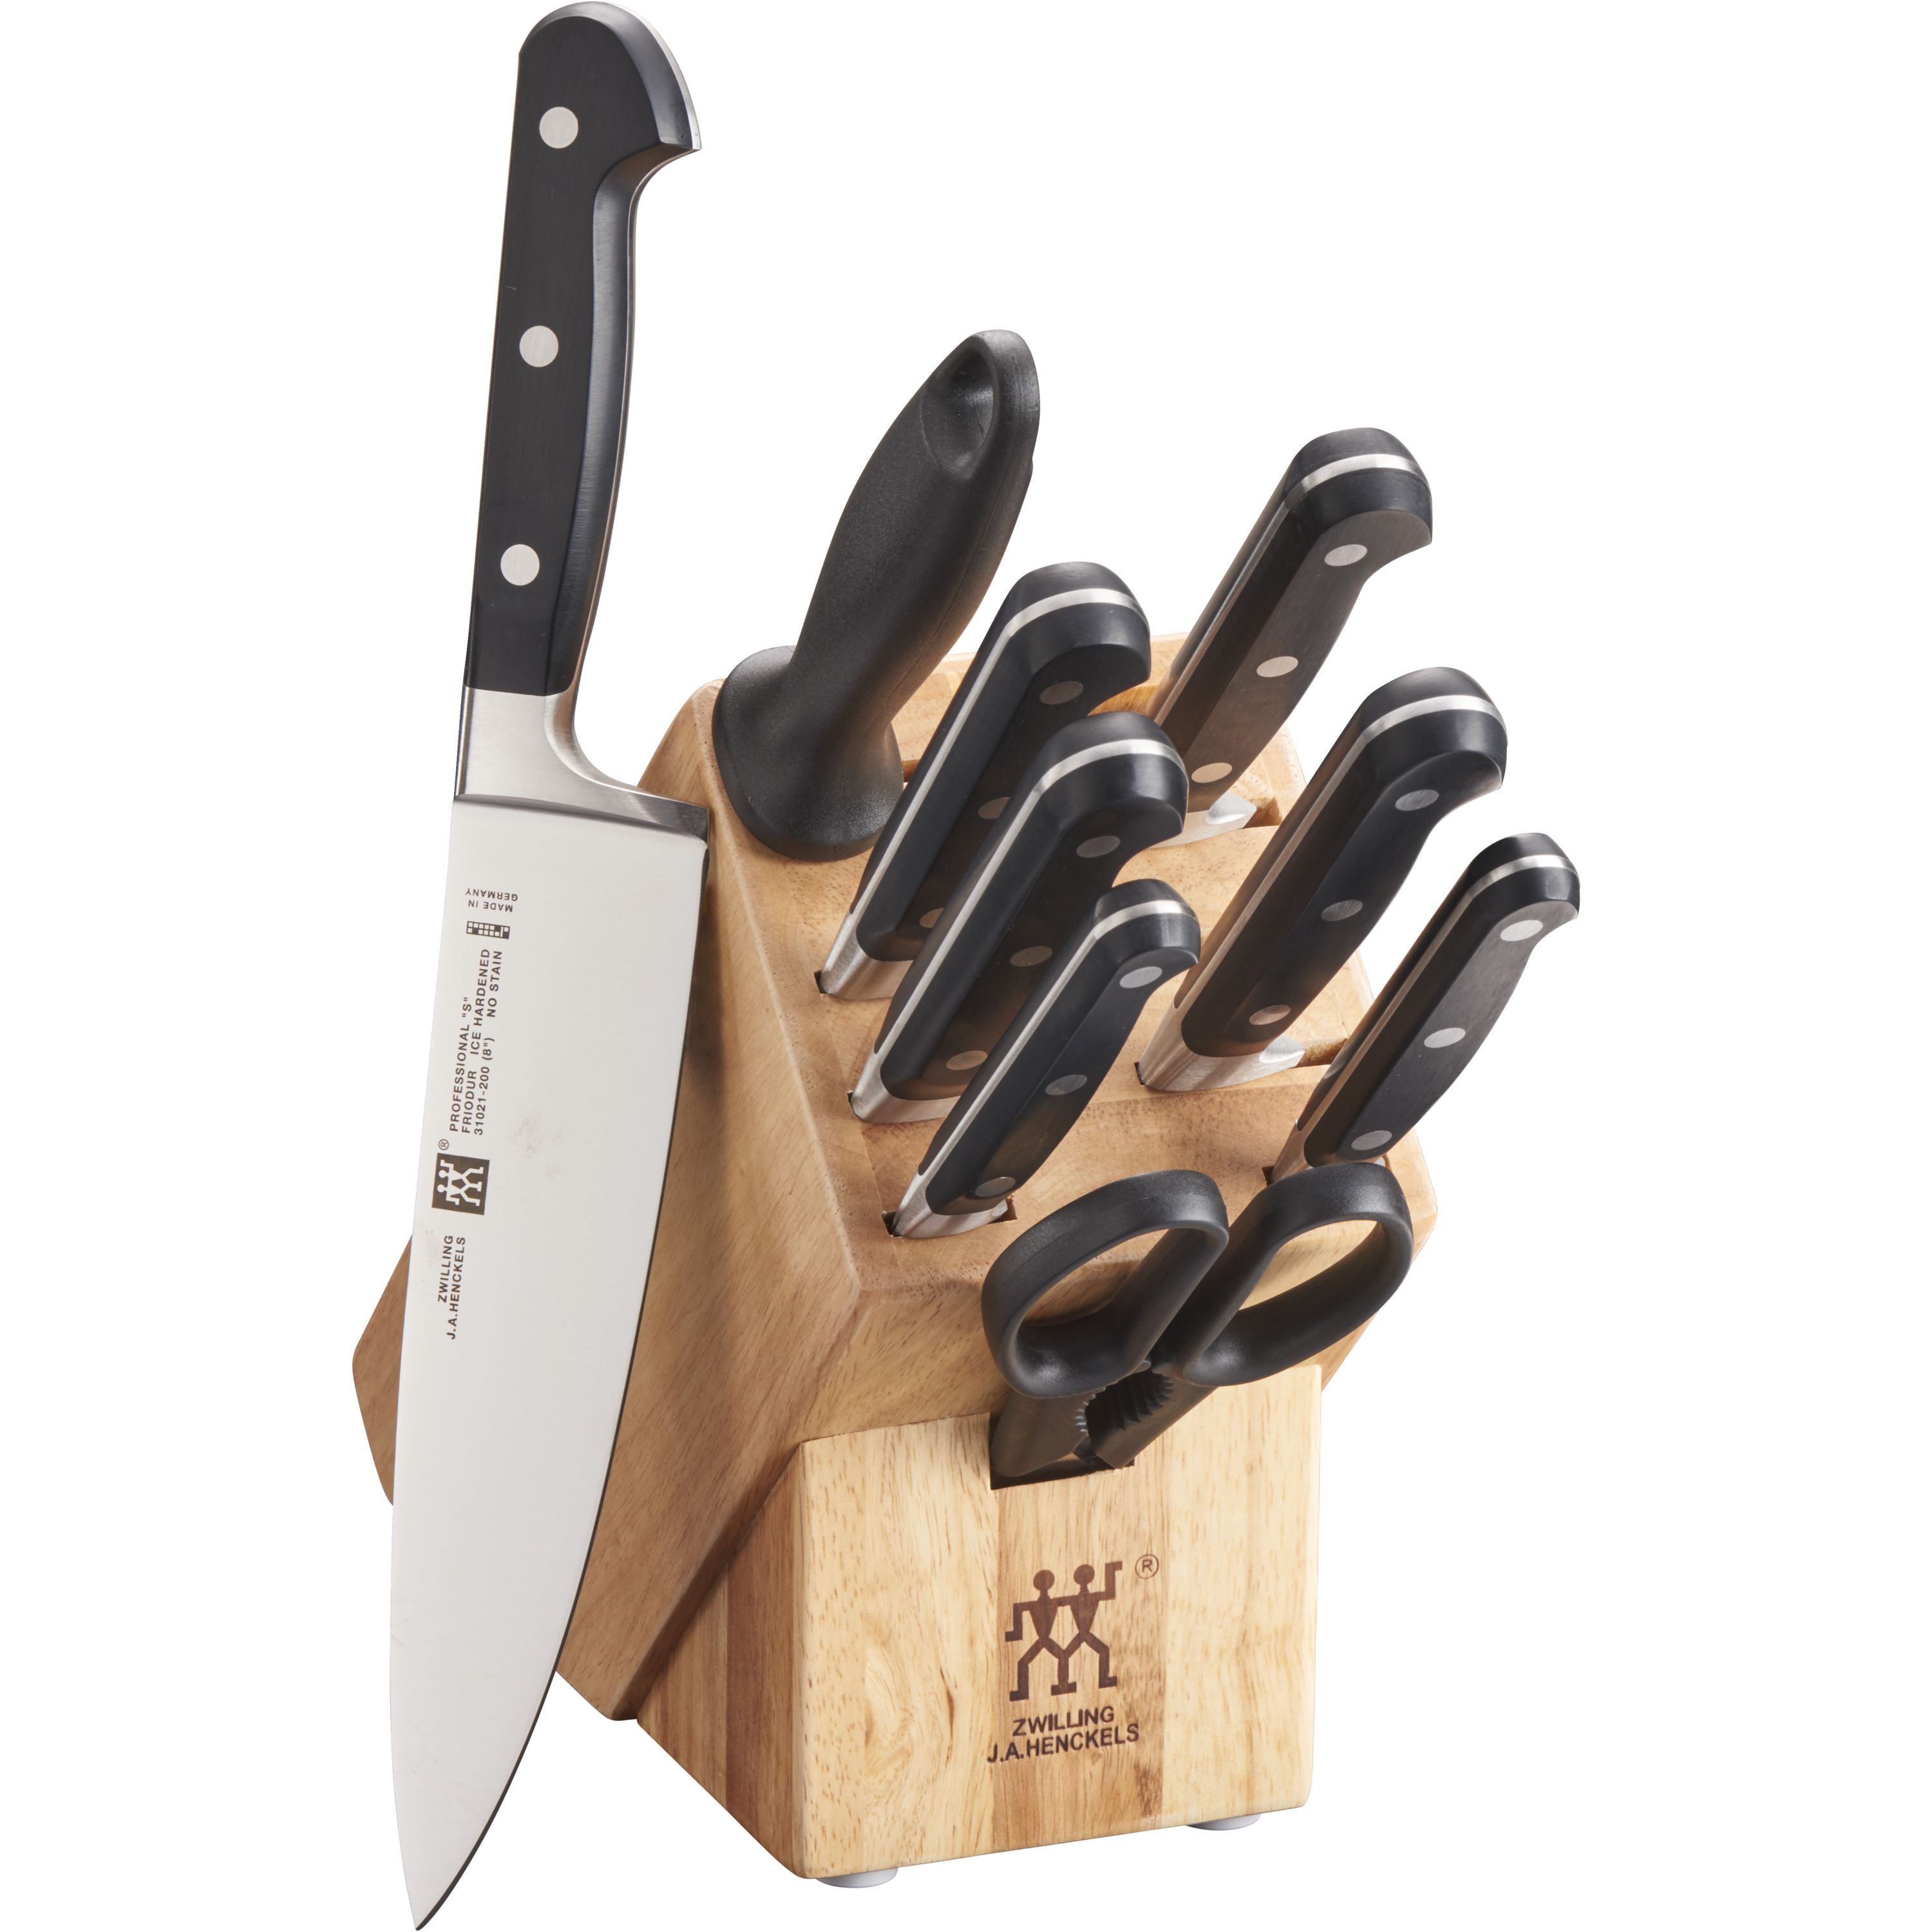 ZWILLING Professional S 10-pc, Knife block set, natural